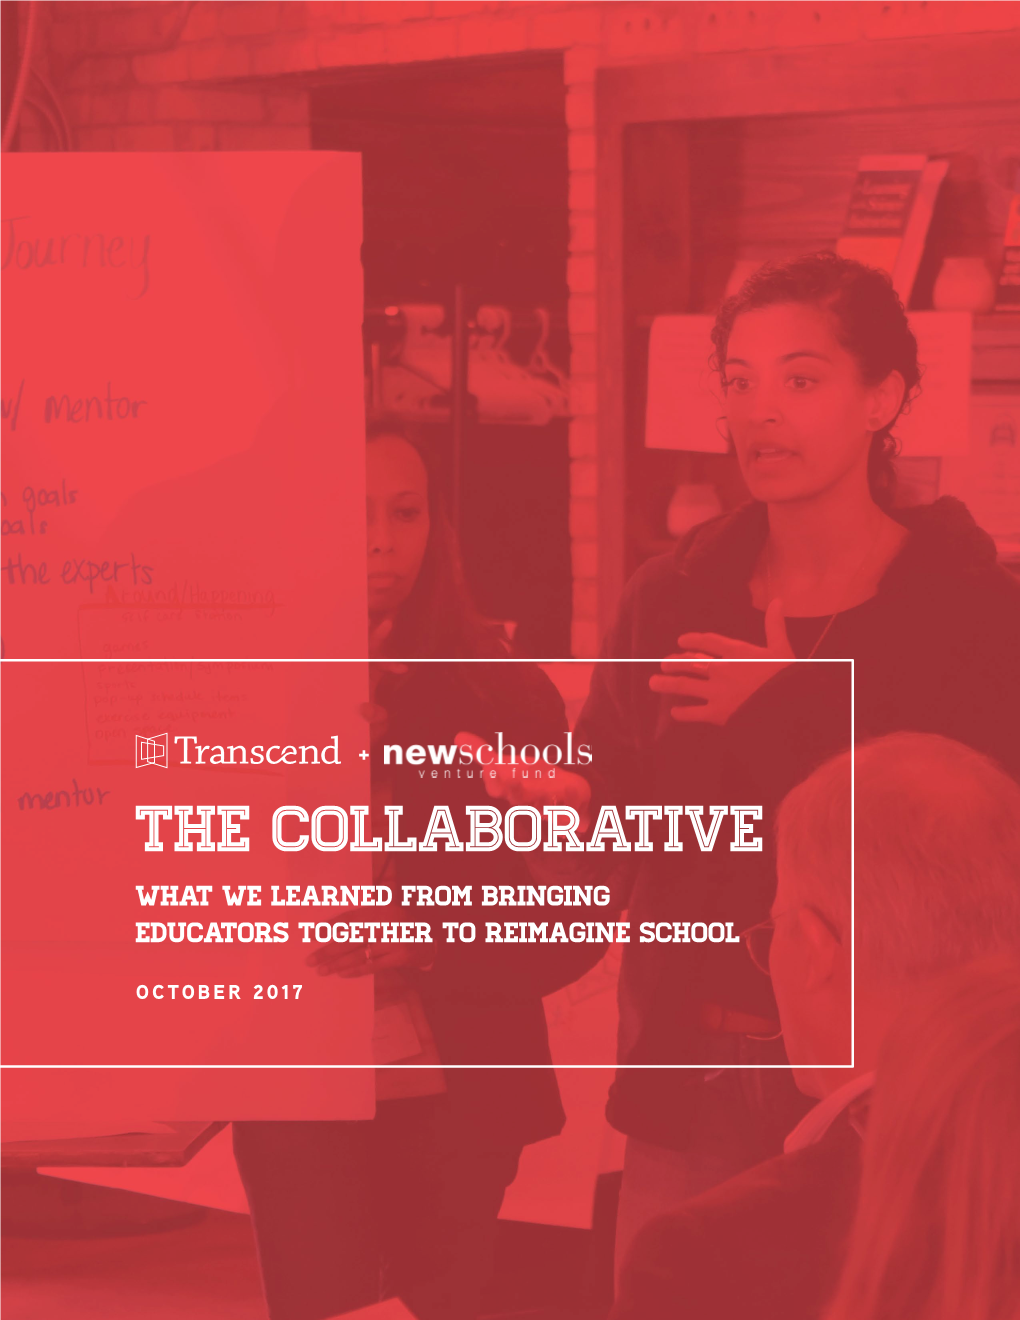 The Collaborative: What We Learned from Bringing Educators Together to Reimagine School